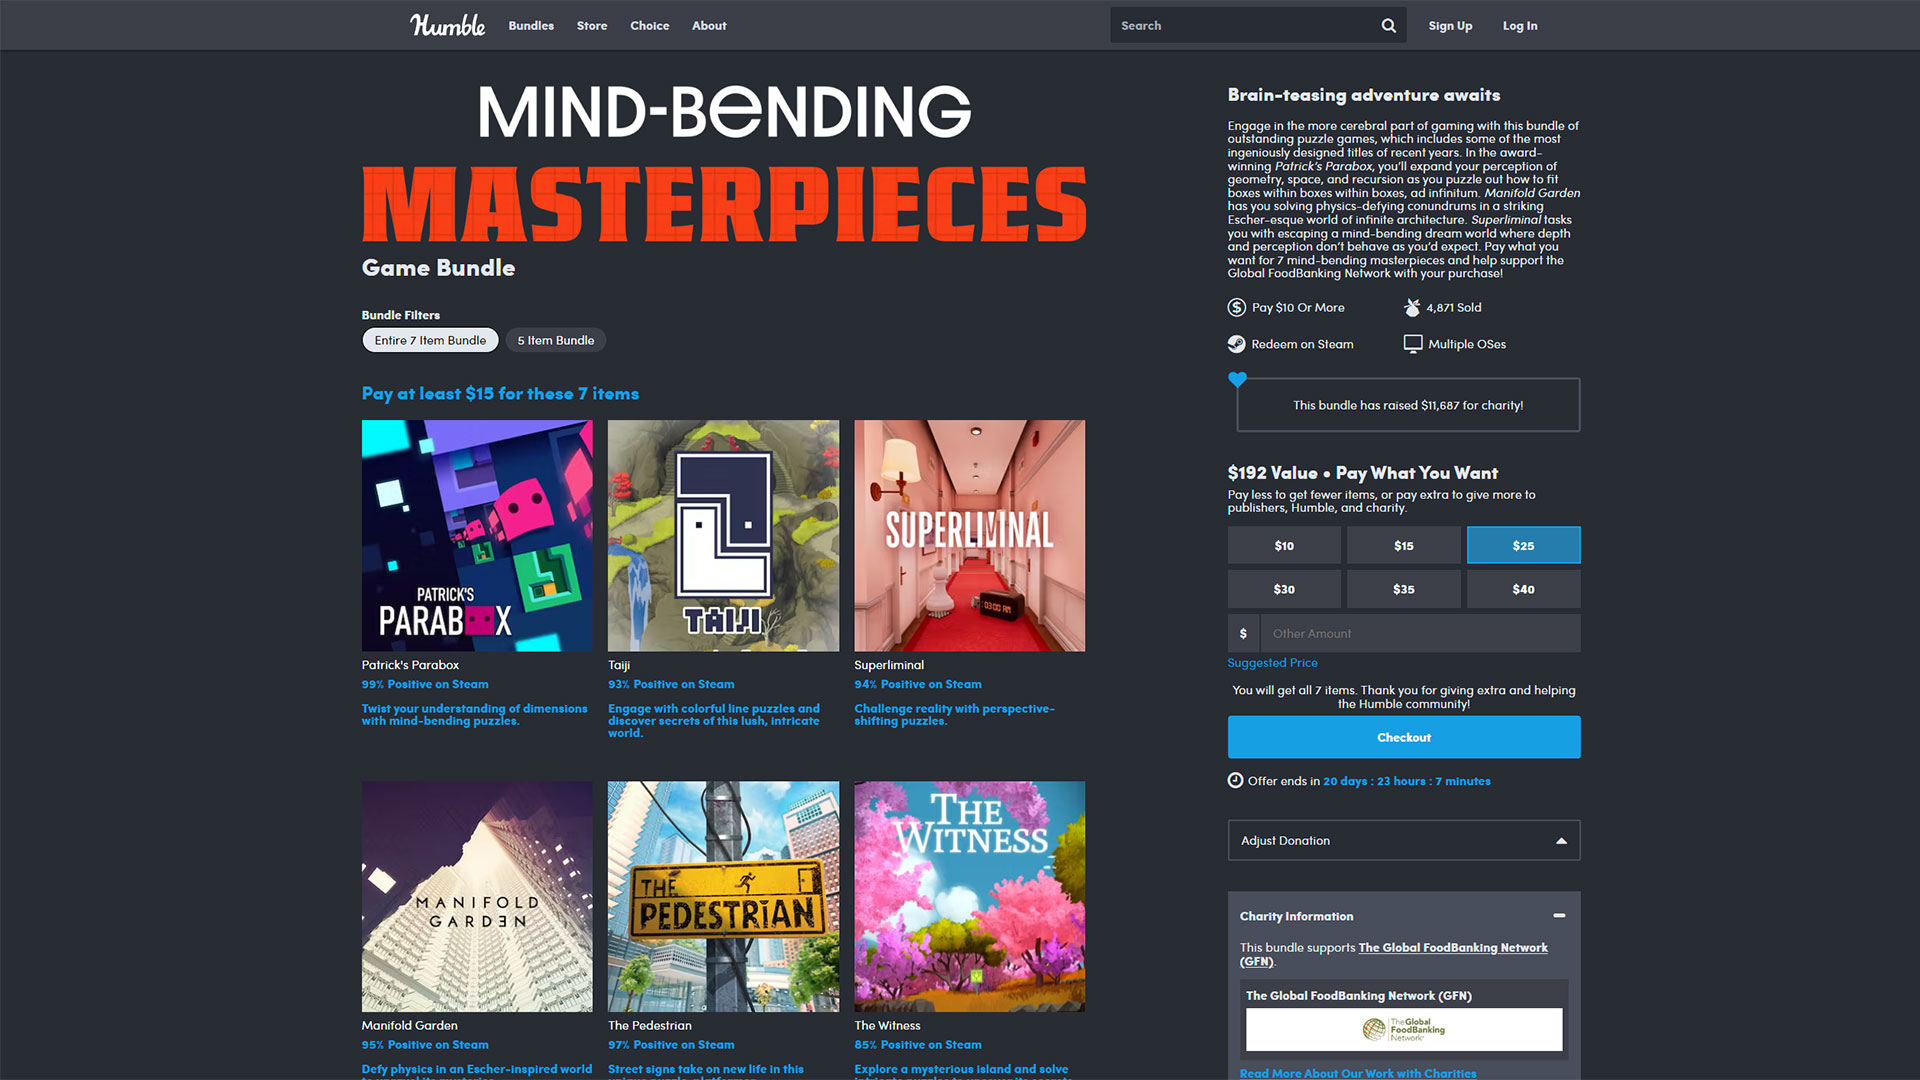 The Mind-Bending Masterpieces Humble Bundle is now available